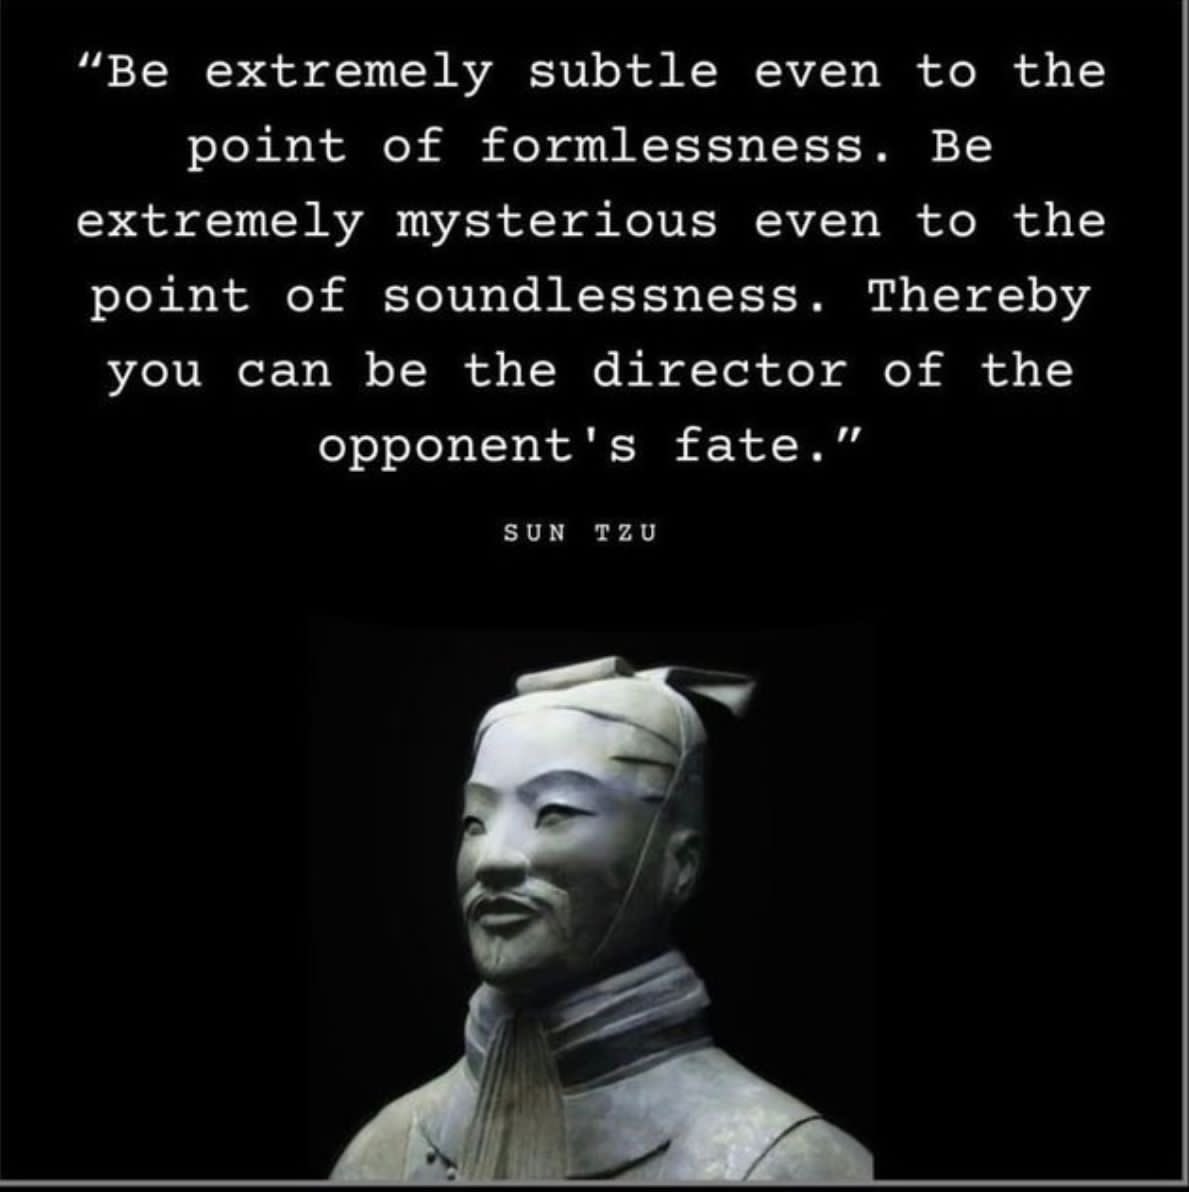 THE DOCTRINE OF STRATEGIC AMBIGUITY…Even Sun Tzu understood this doctrine in afore times!! Have a blessed day.